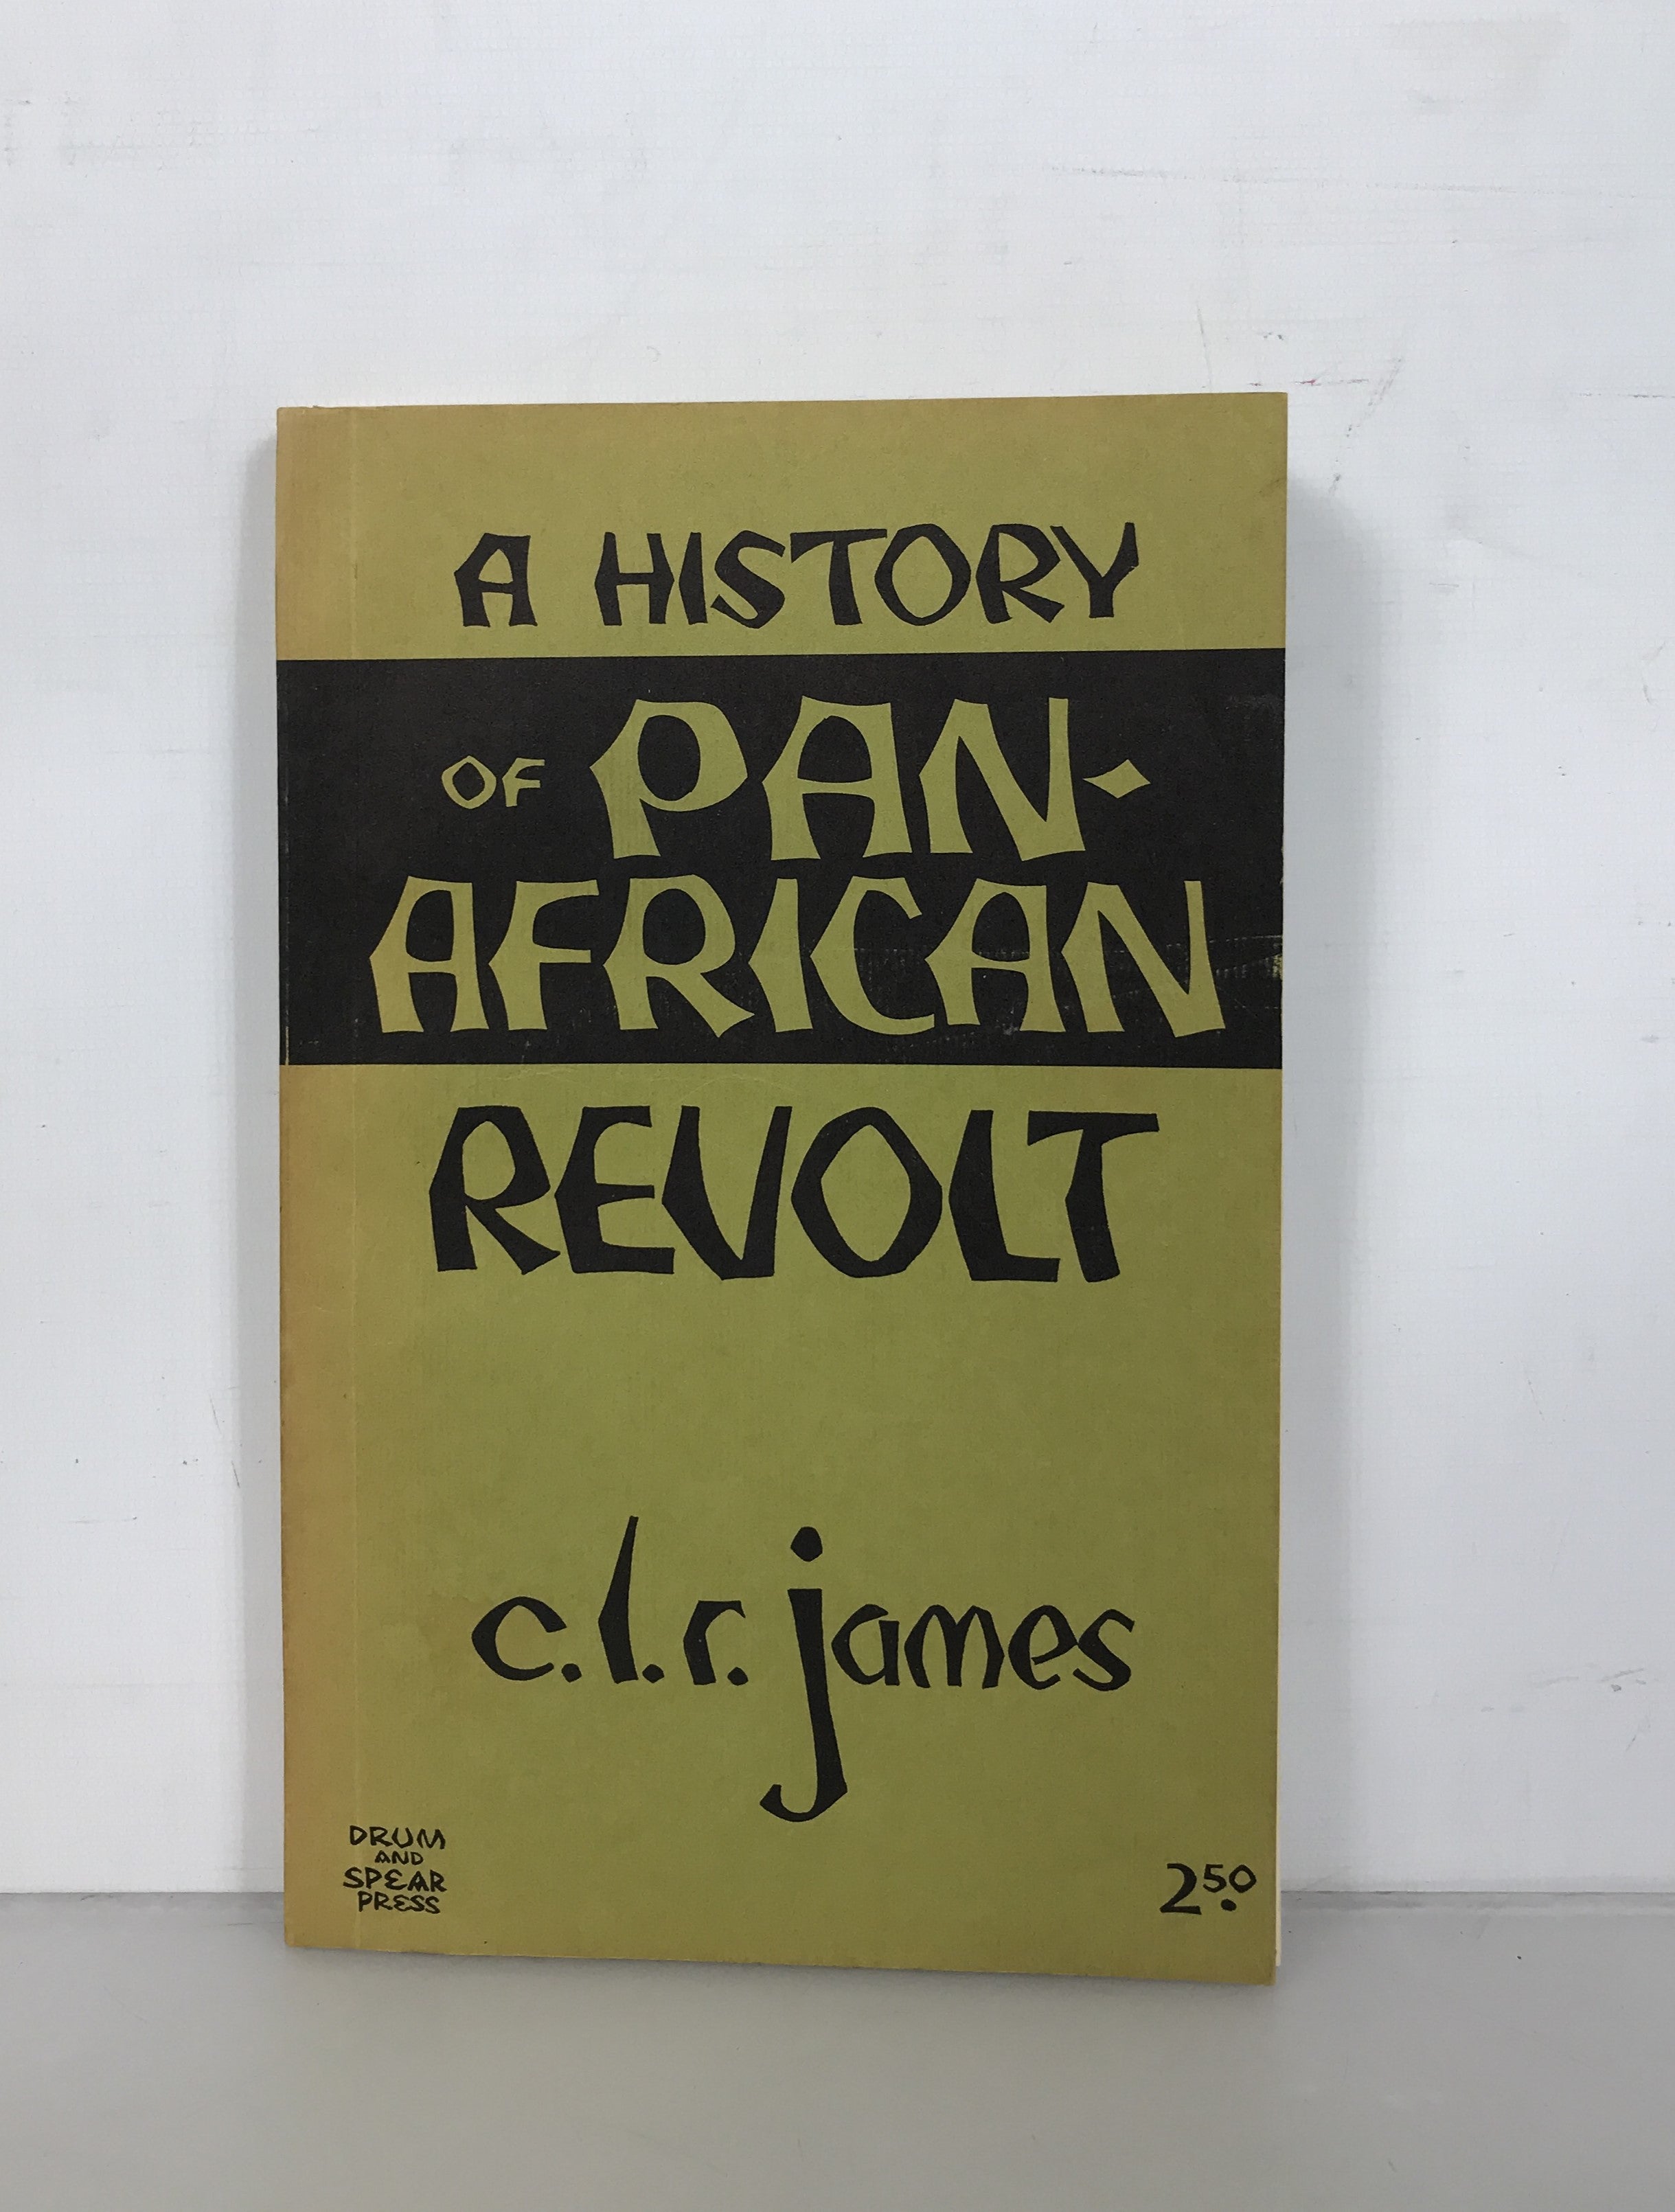 Lot of 3 African American History Books 1939-1973 Including First Edition